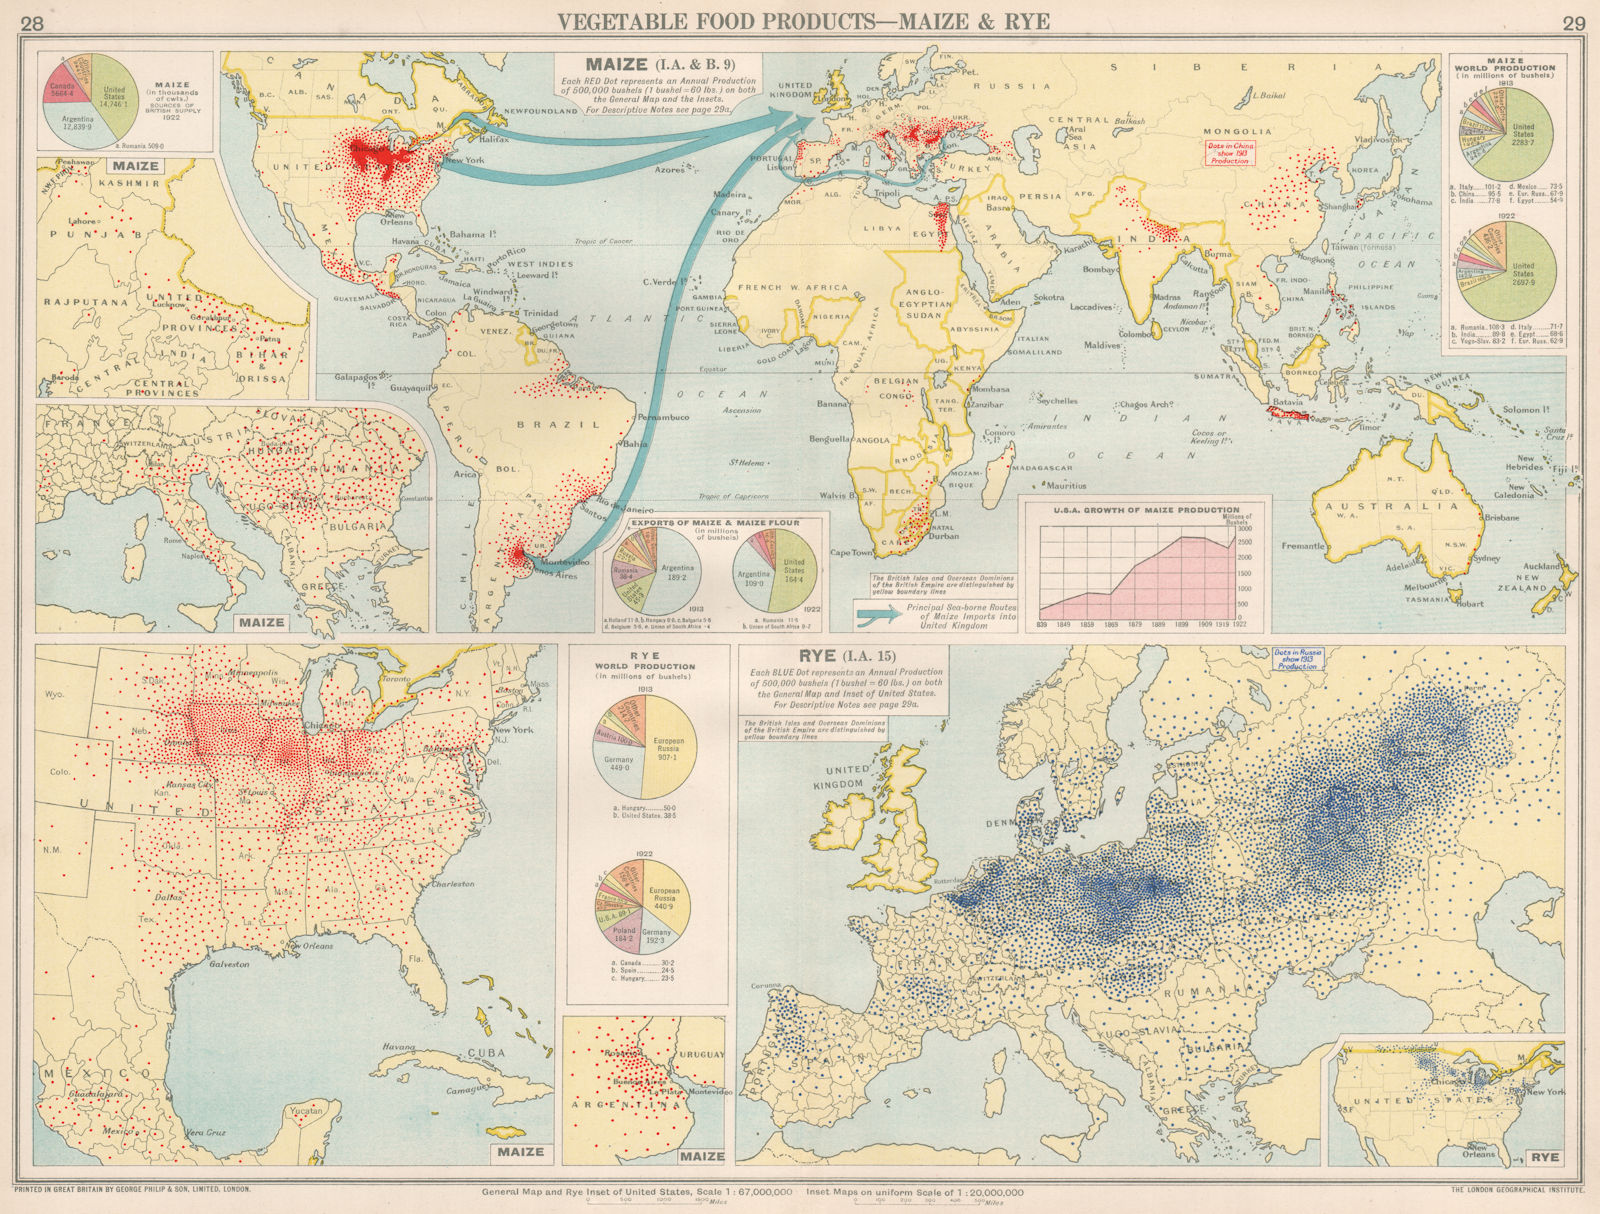 Associate Product World. Food Production. Maize & Rye. United States & Europe 1925 old map